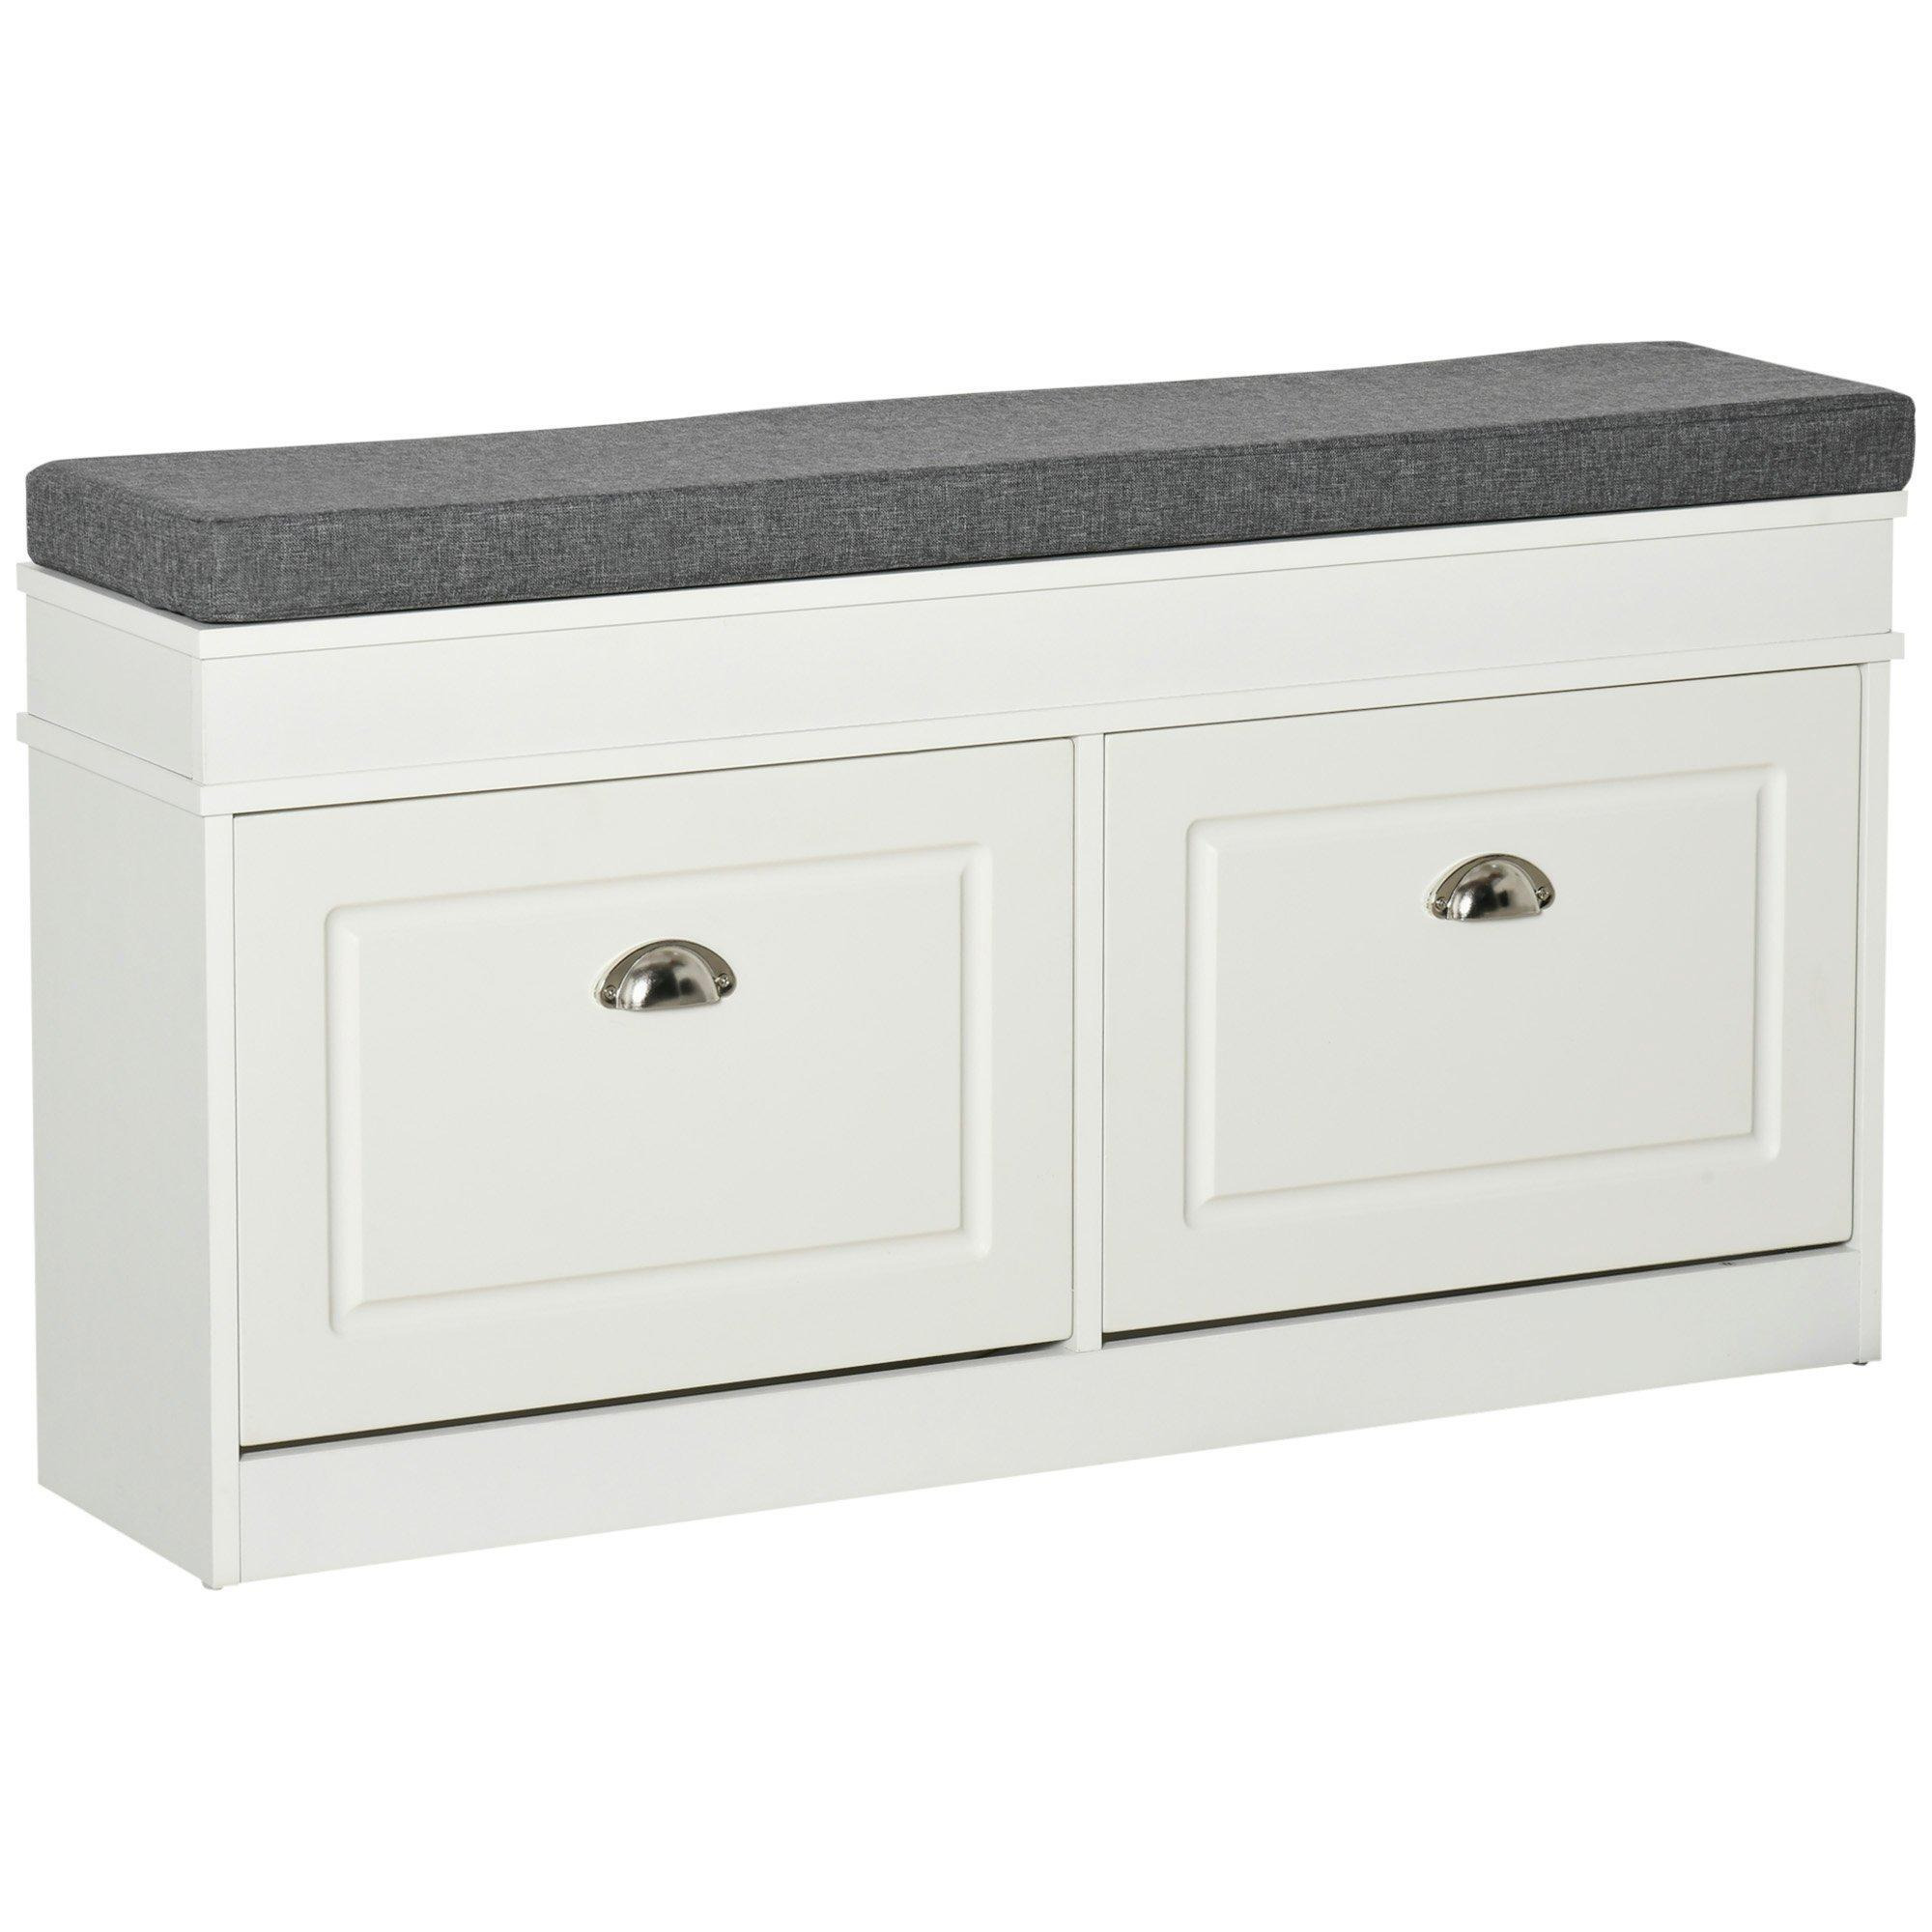 Shoe Storage Bench with Seat Cushion Cabinet Organizer with 2 Drawers - image 1